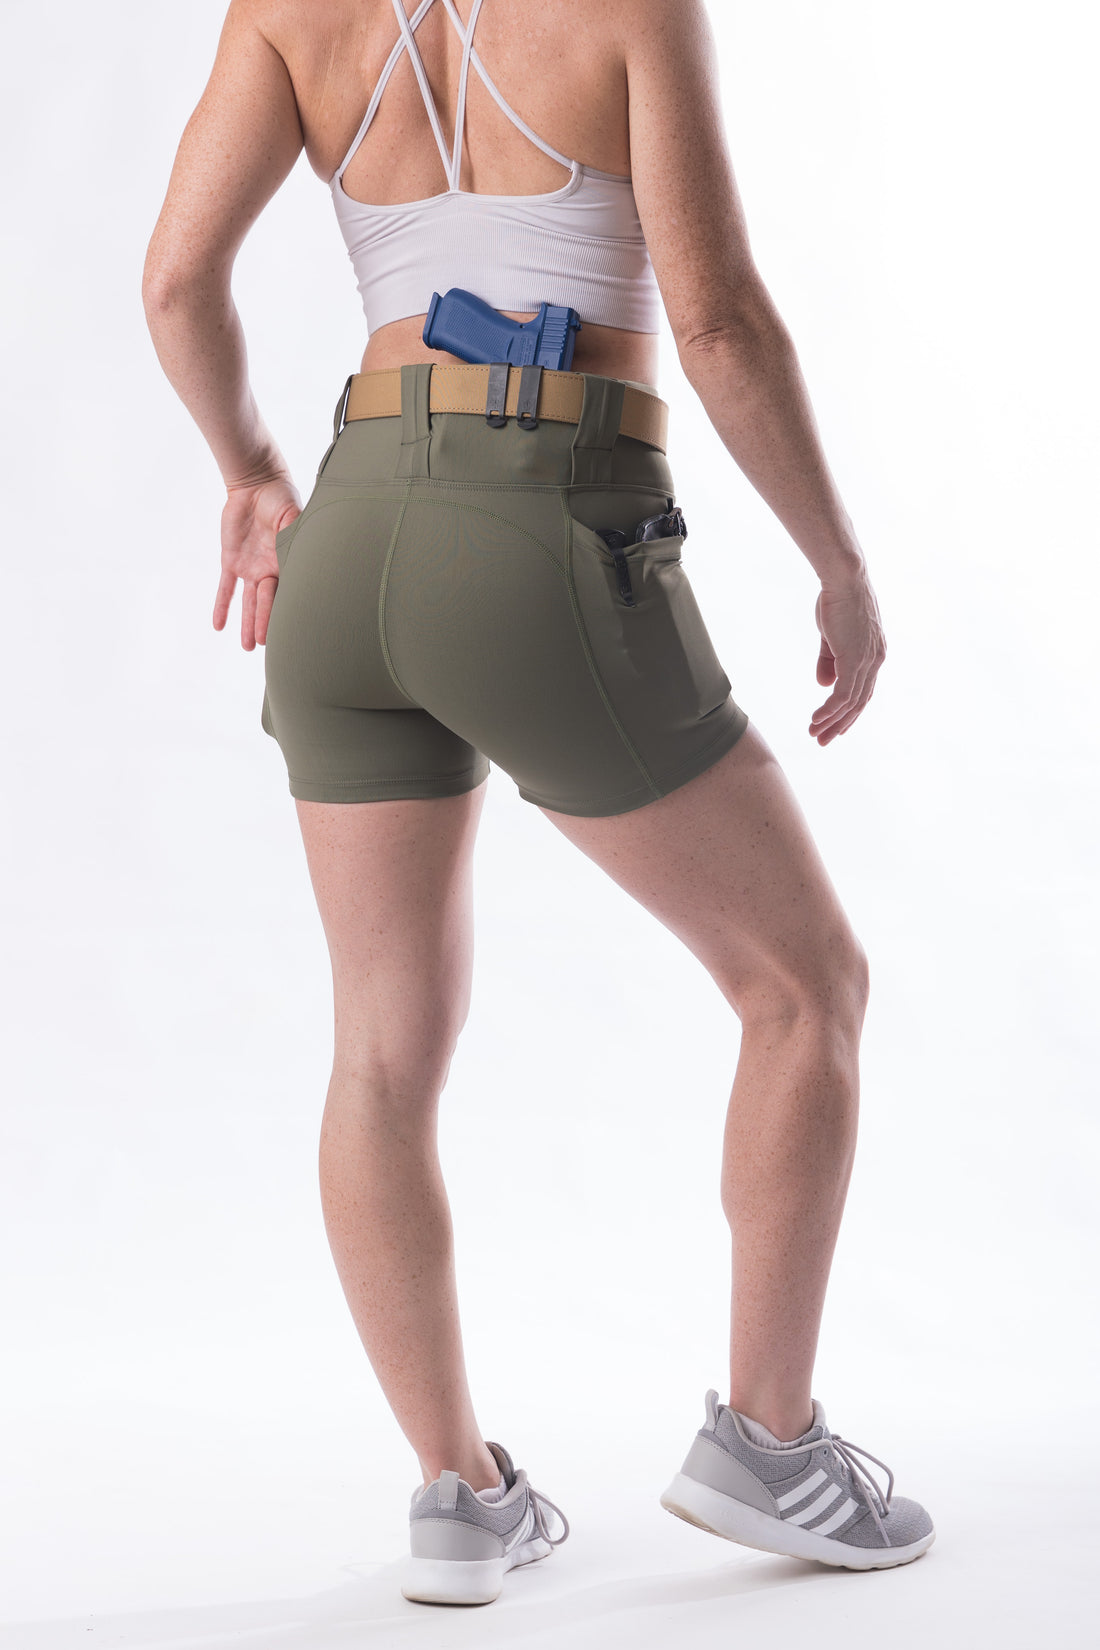 NEW Women's High Rise Curvy Carry Shorts, 3" inseam - Olive